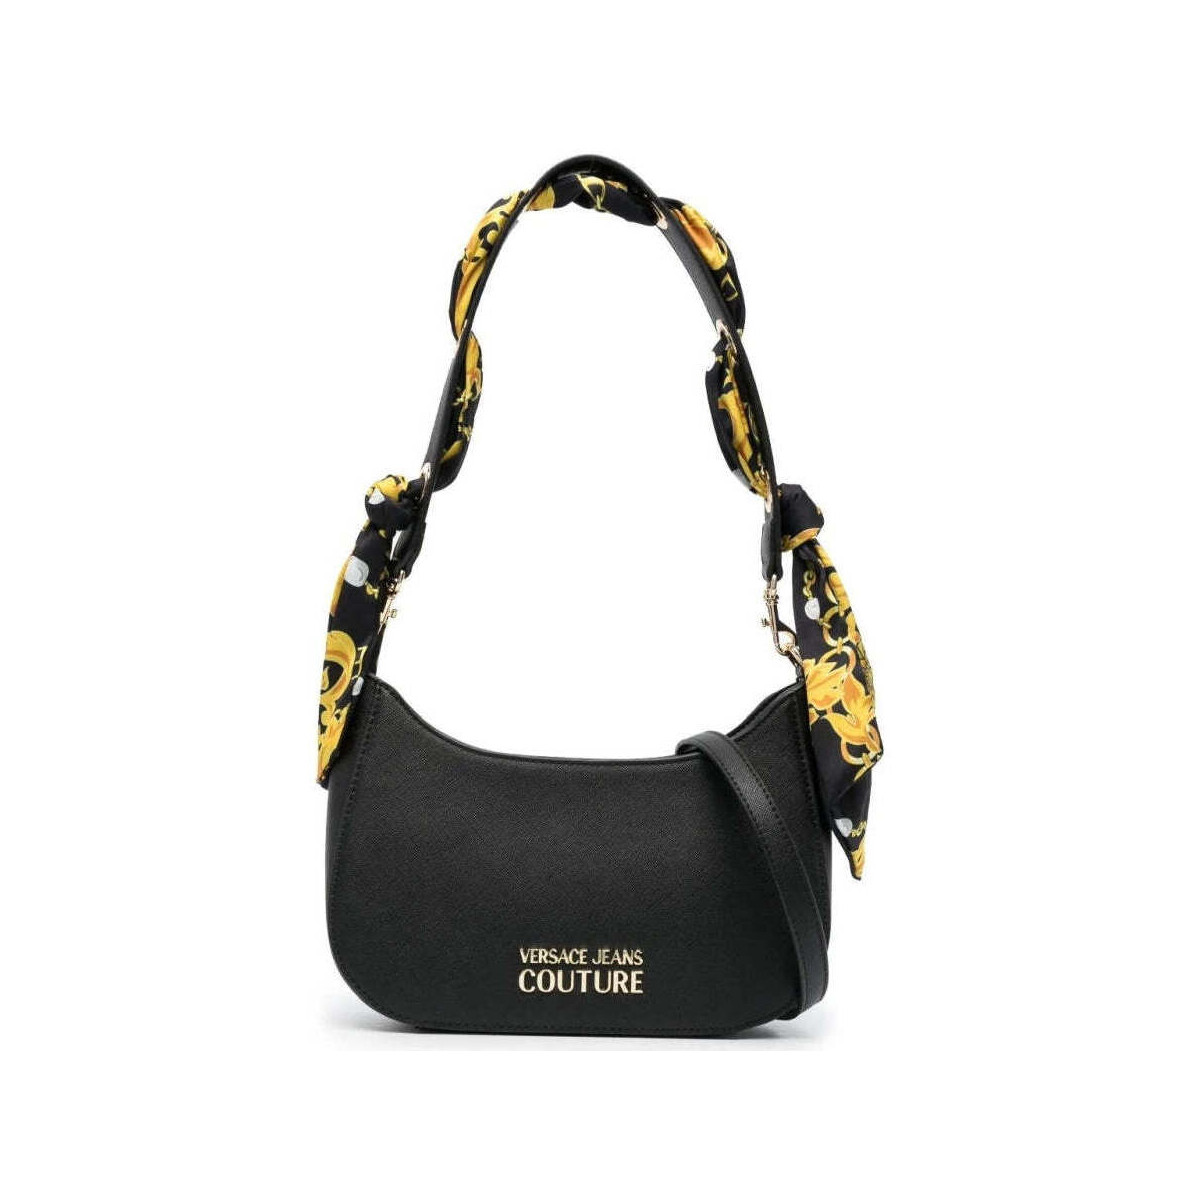 Versace Jeans Couture Noir thelma classic hobo bag SI6g9hLi